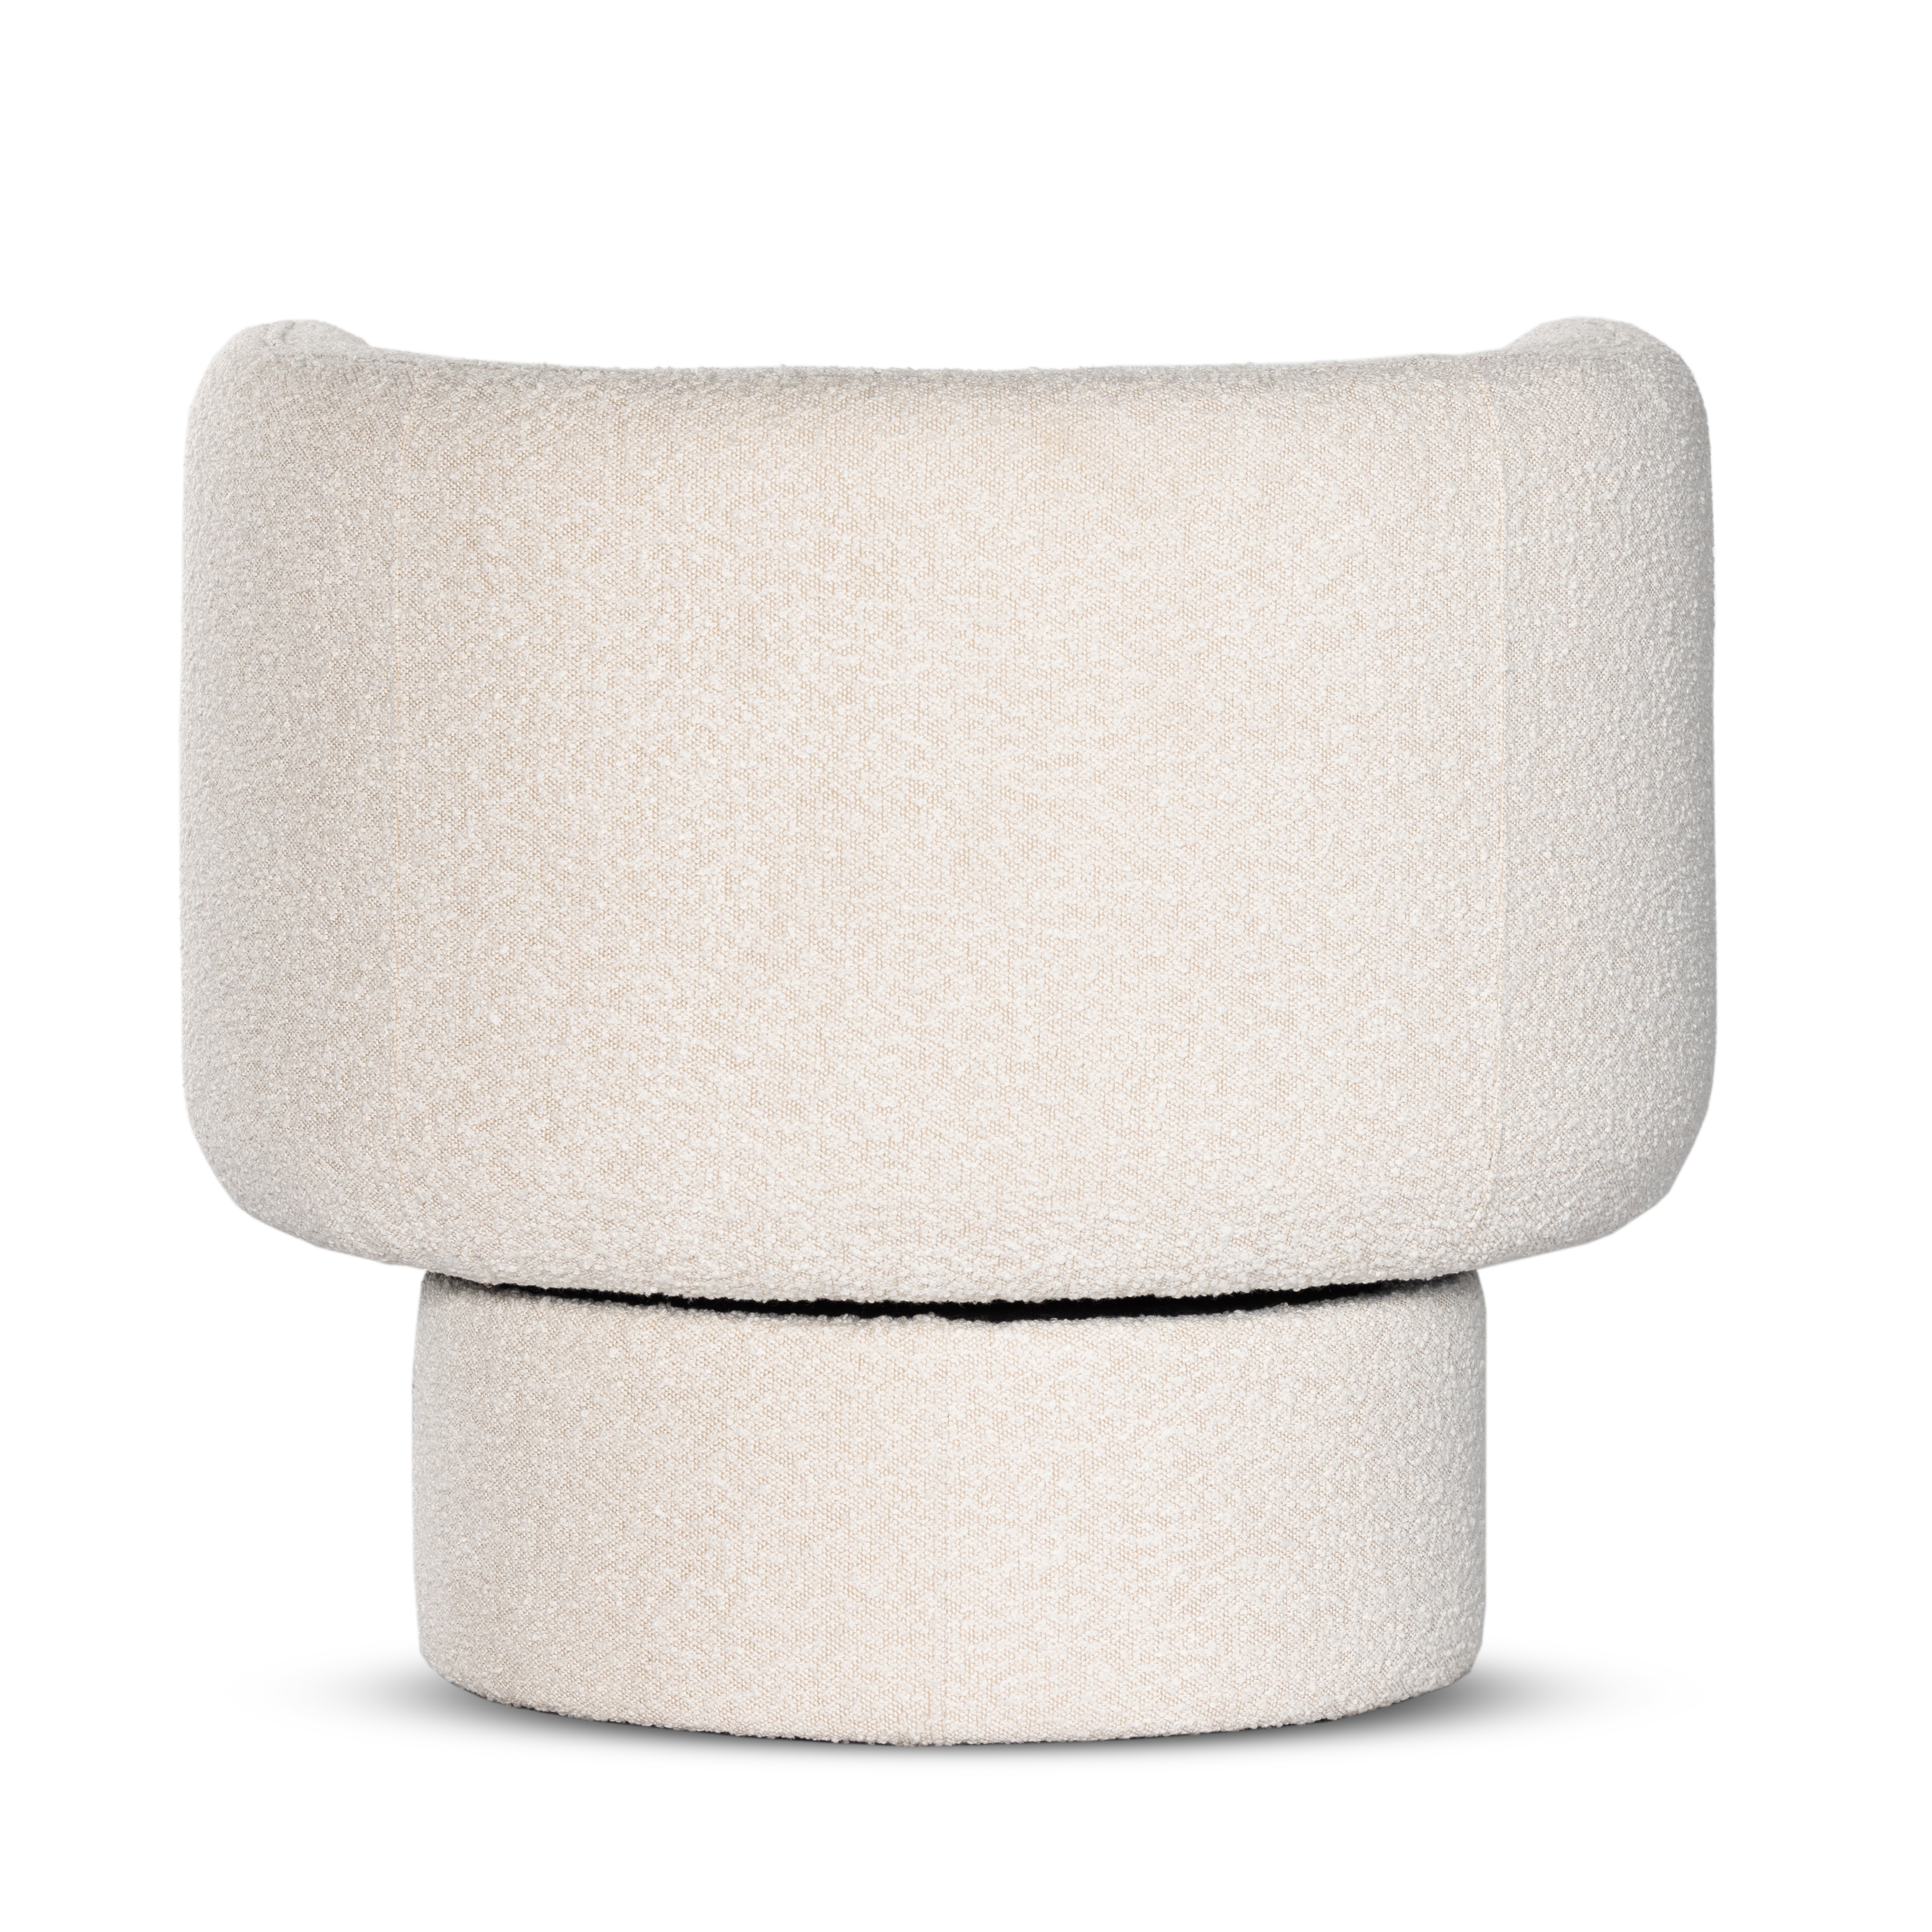 Adriel Swivel Chair-Knoll Natural - Image 5